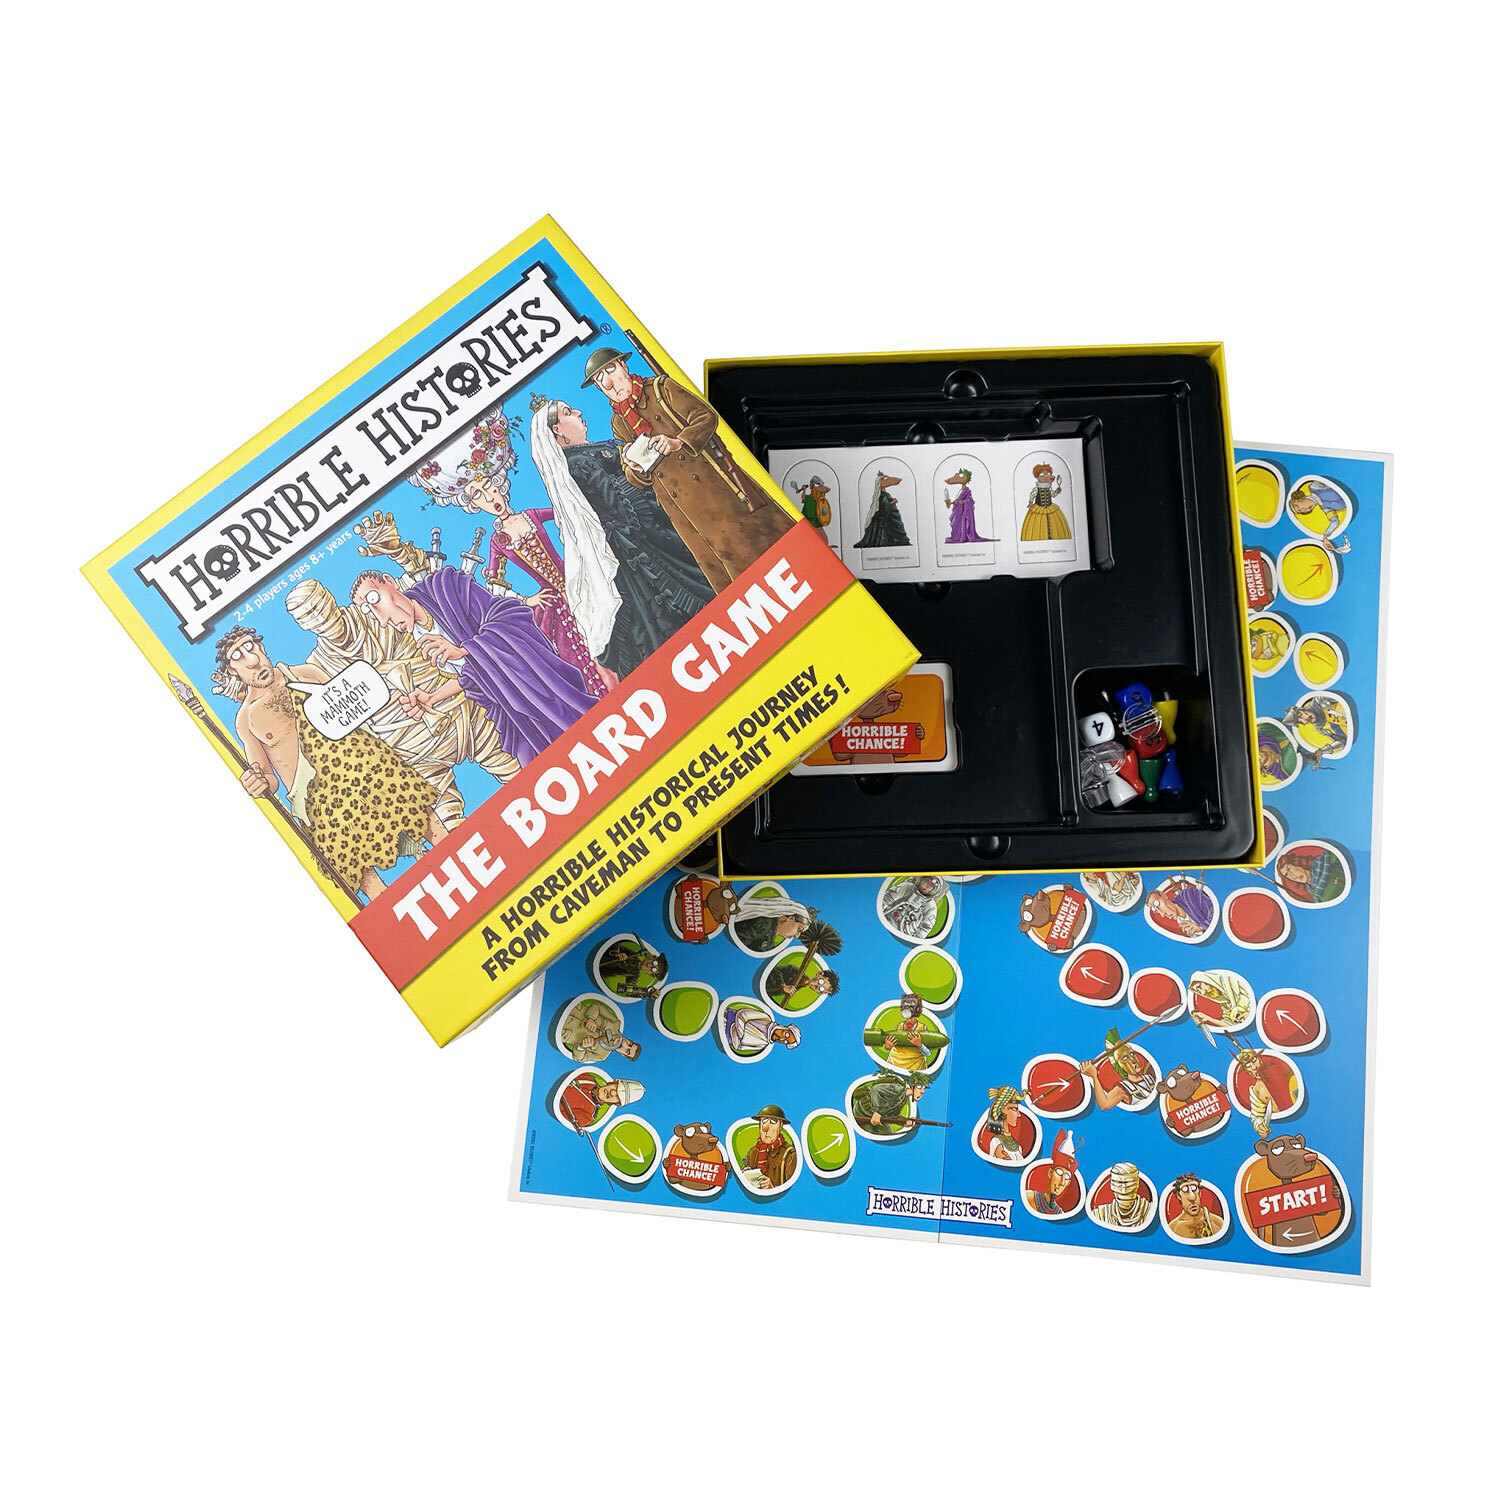 Horrible Histories The Board Game Image 5